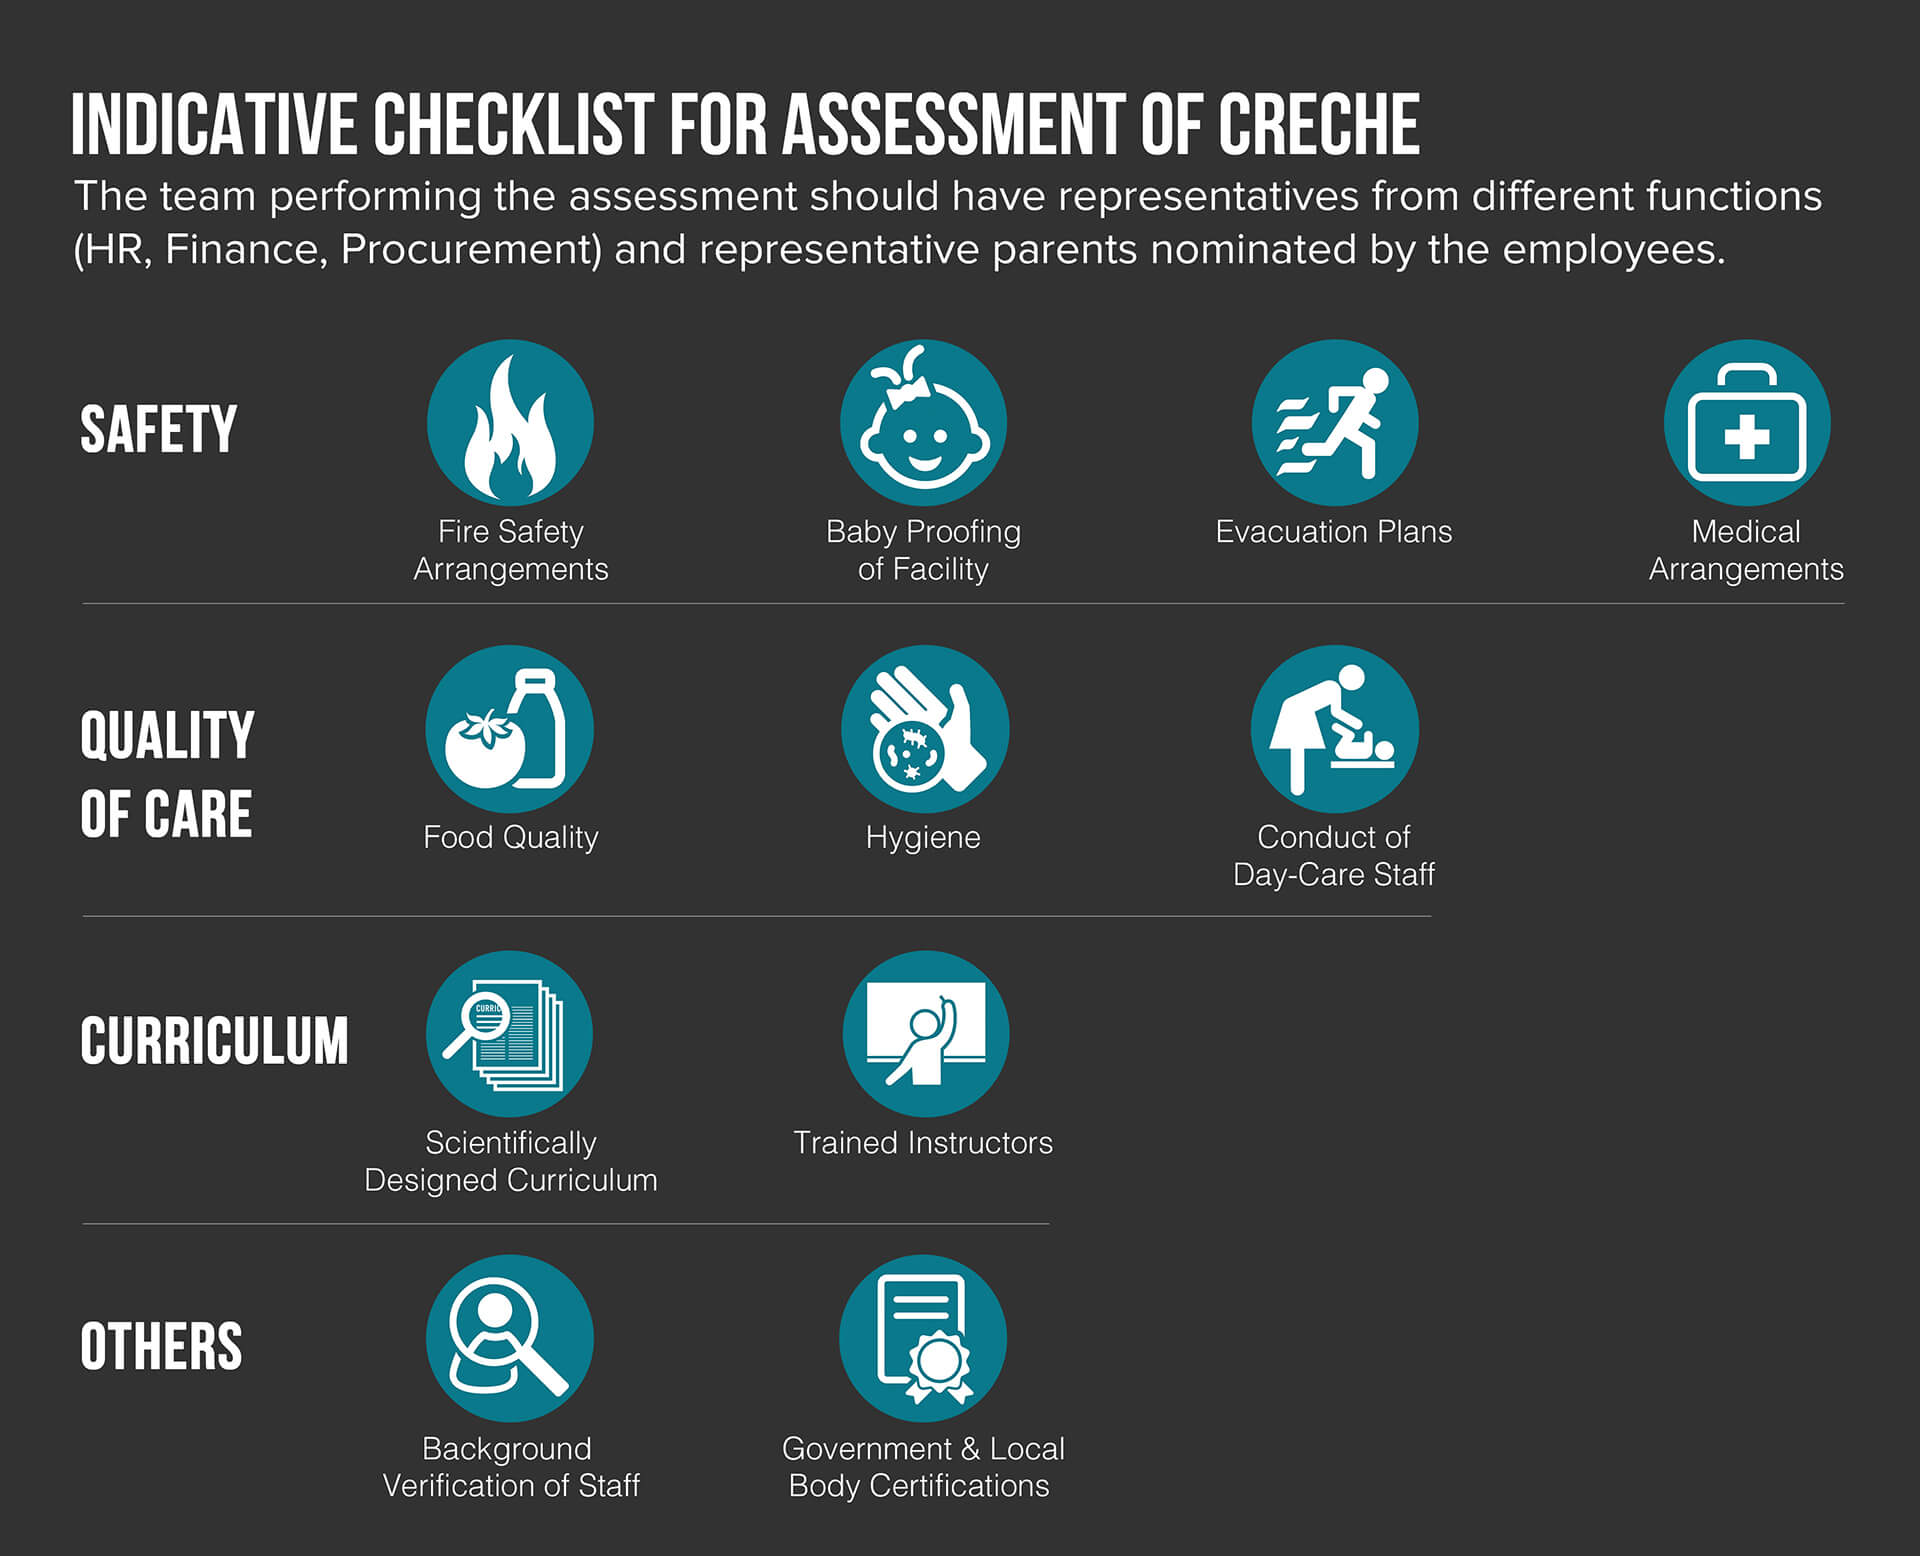 Indicative checklist for assessment of Creche